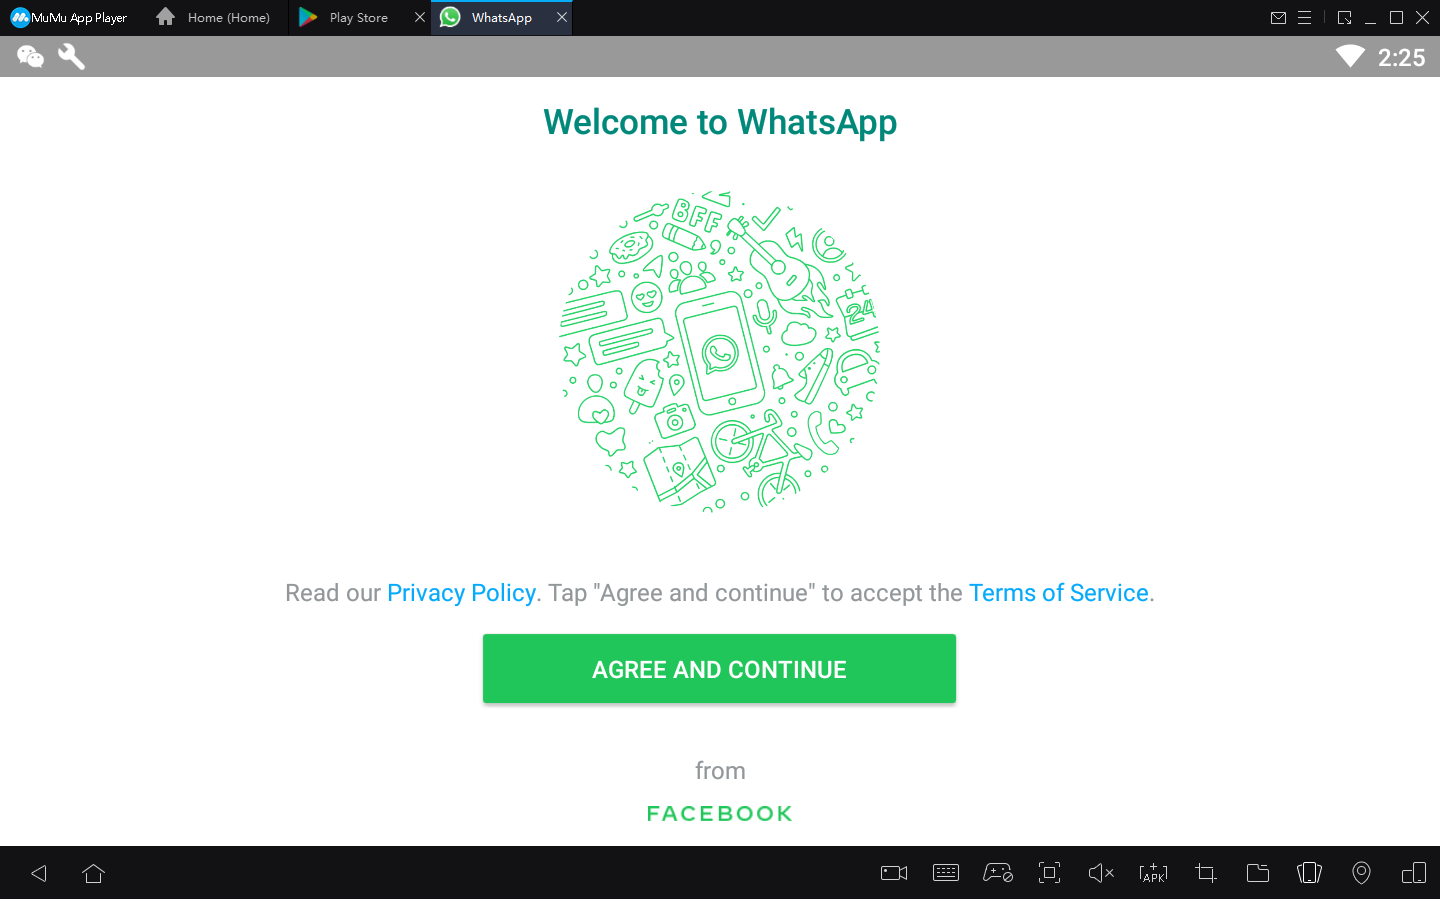 How to log in to WhatsApp with MuMu Player on PC4